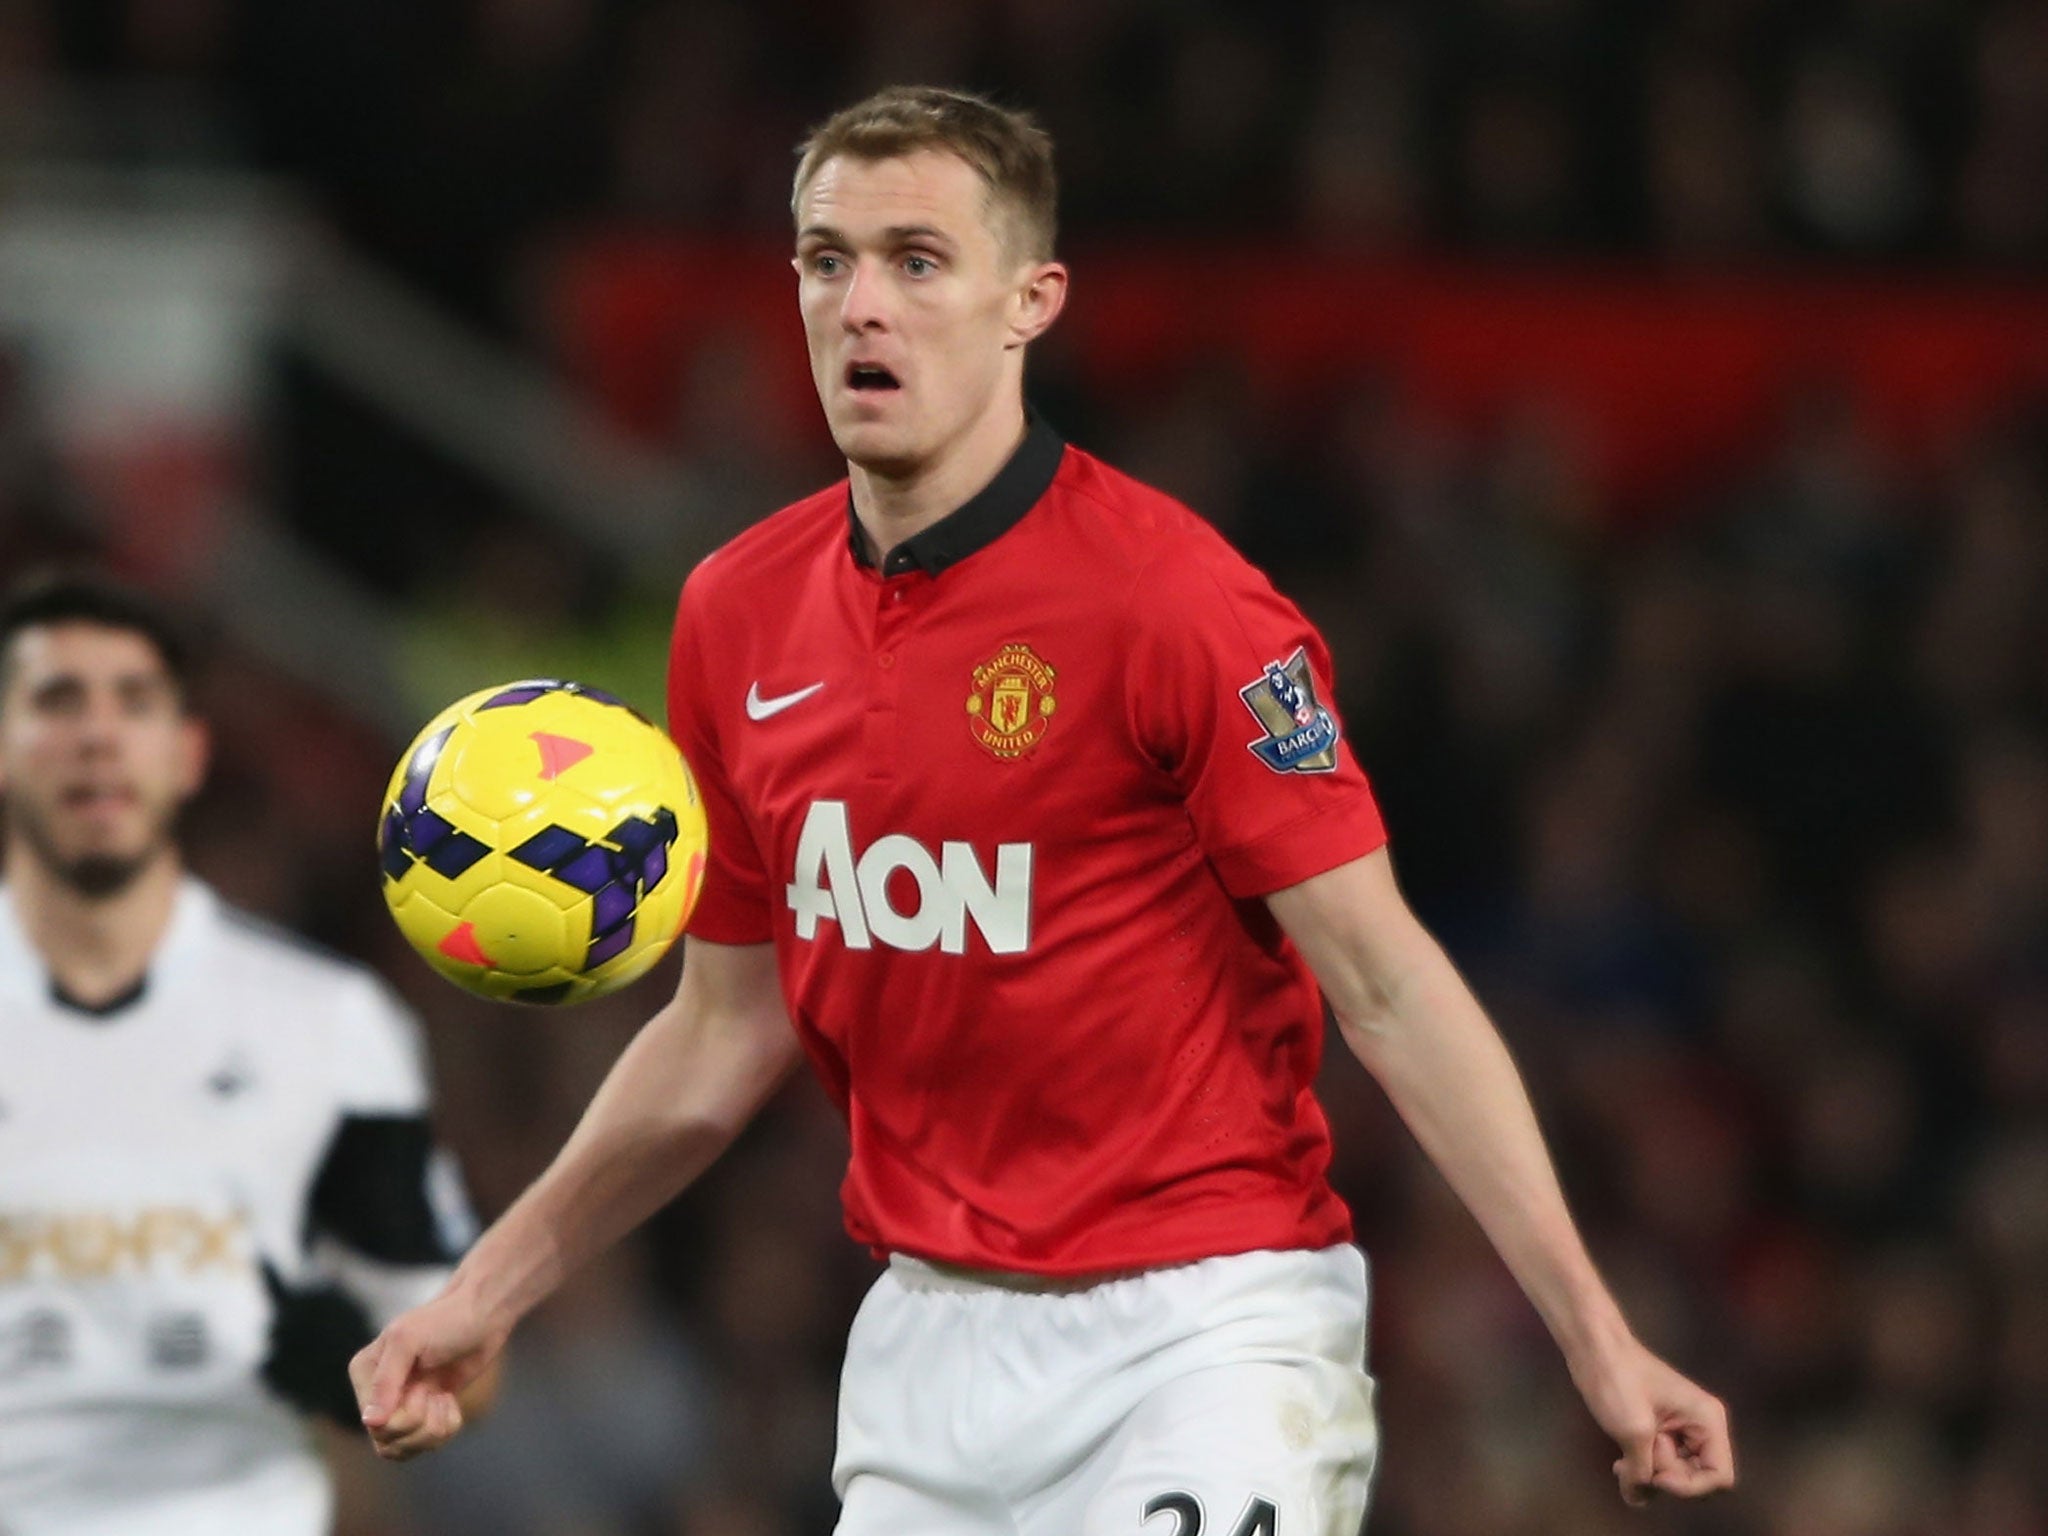 Darren Fletcher has denied claims of a dressing room rift between the Manchester United players and manager David Moyes